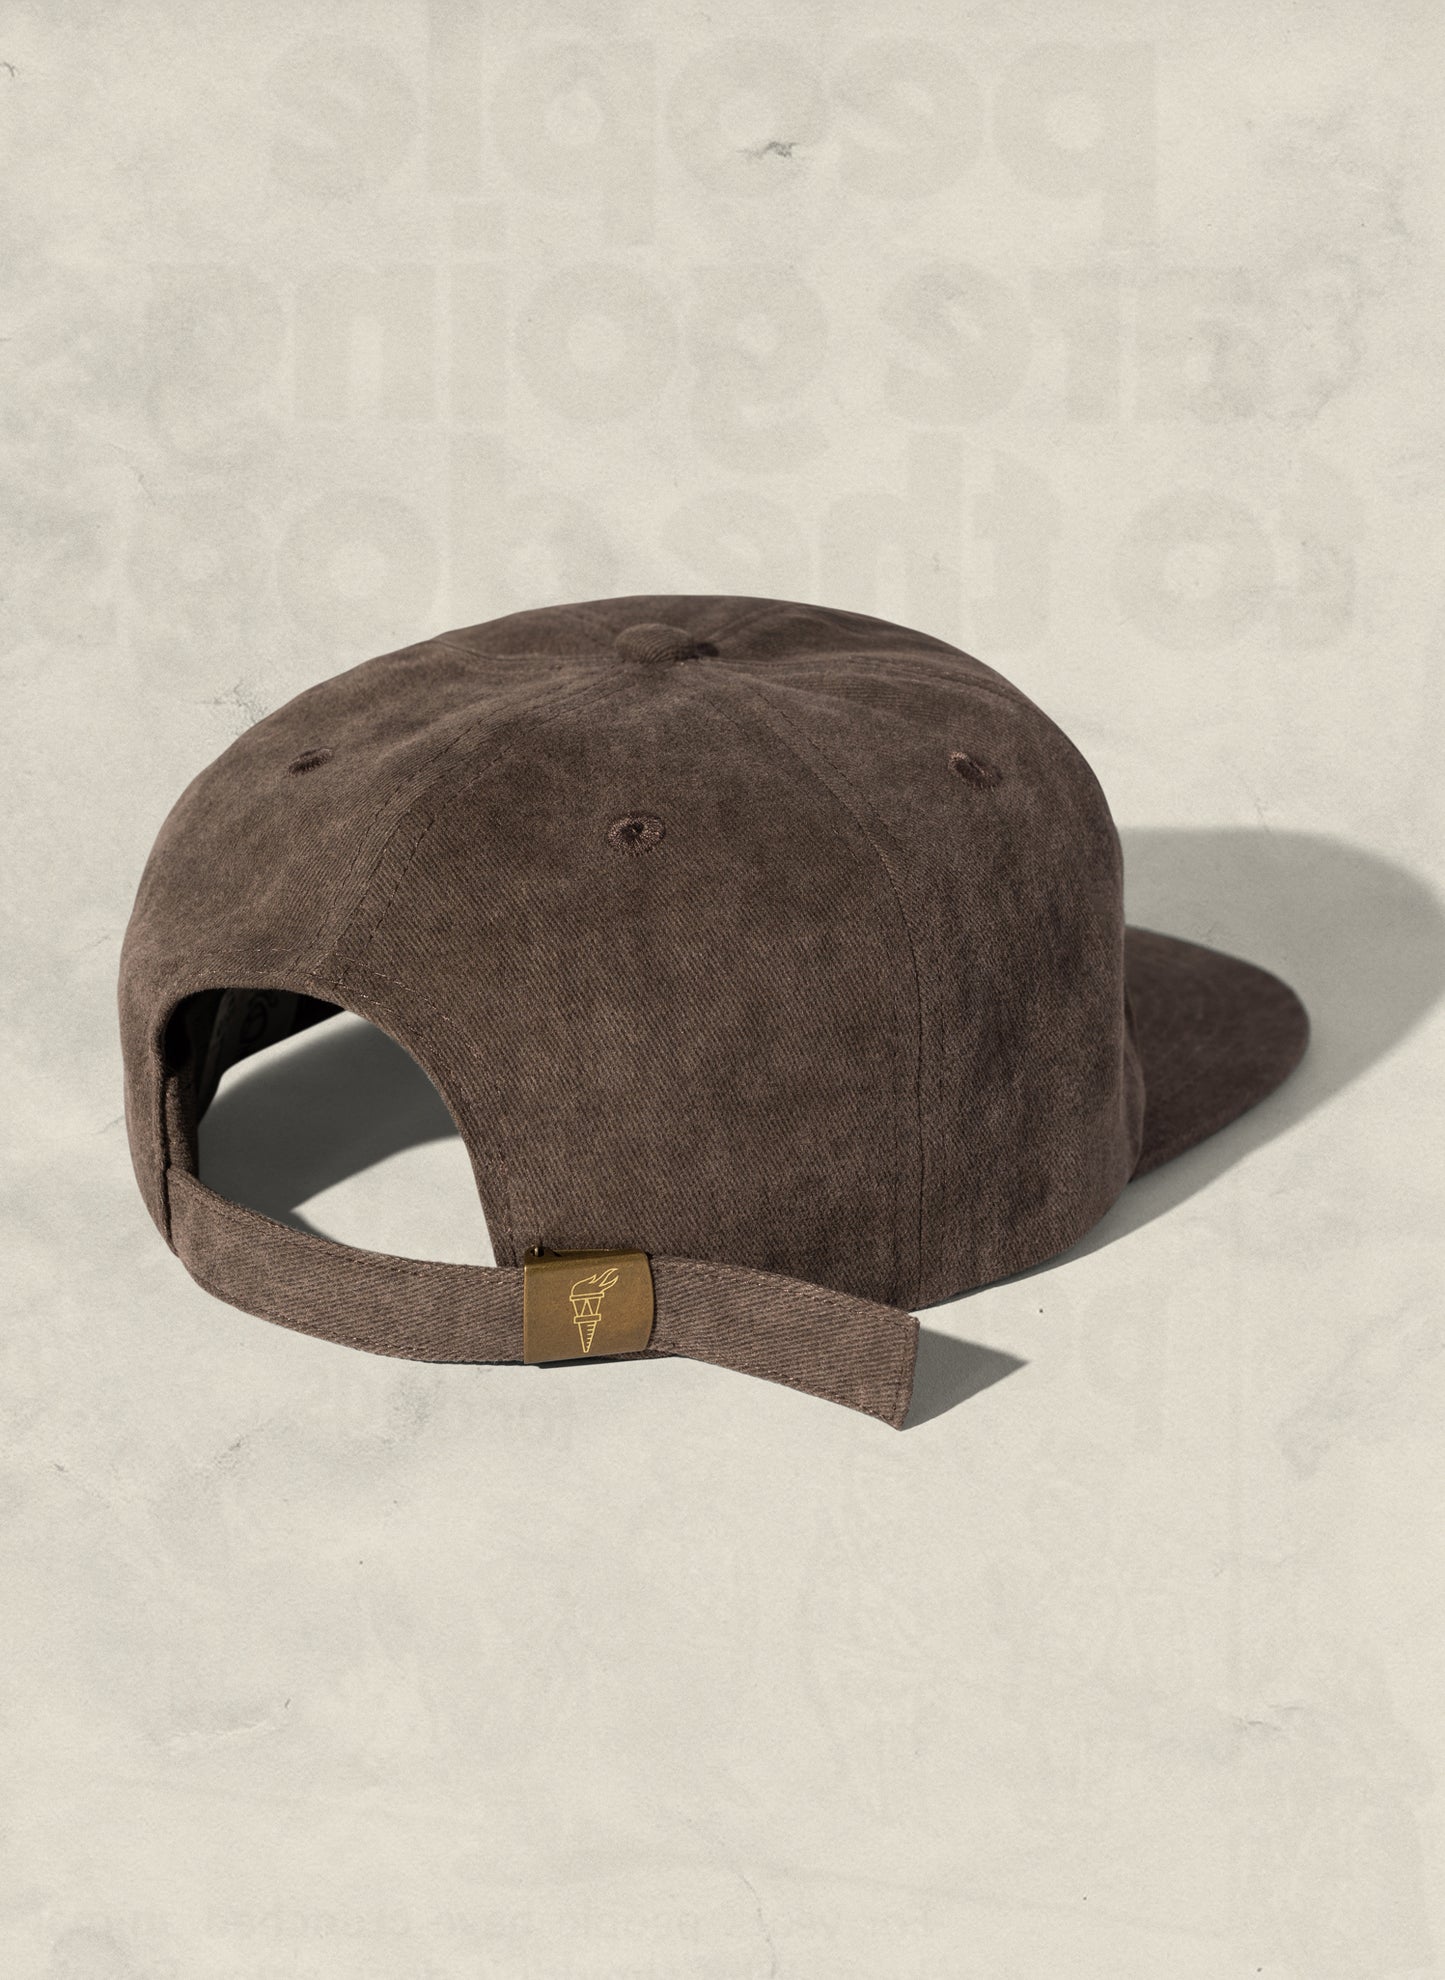 Weld Mfg Washed Brushed Cotton Twill Pigment Dyed Unstructured 5 Panel Vintage Inspired Baseball Strapback Hat - Laid Back Headwear - Brown